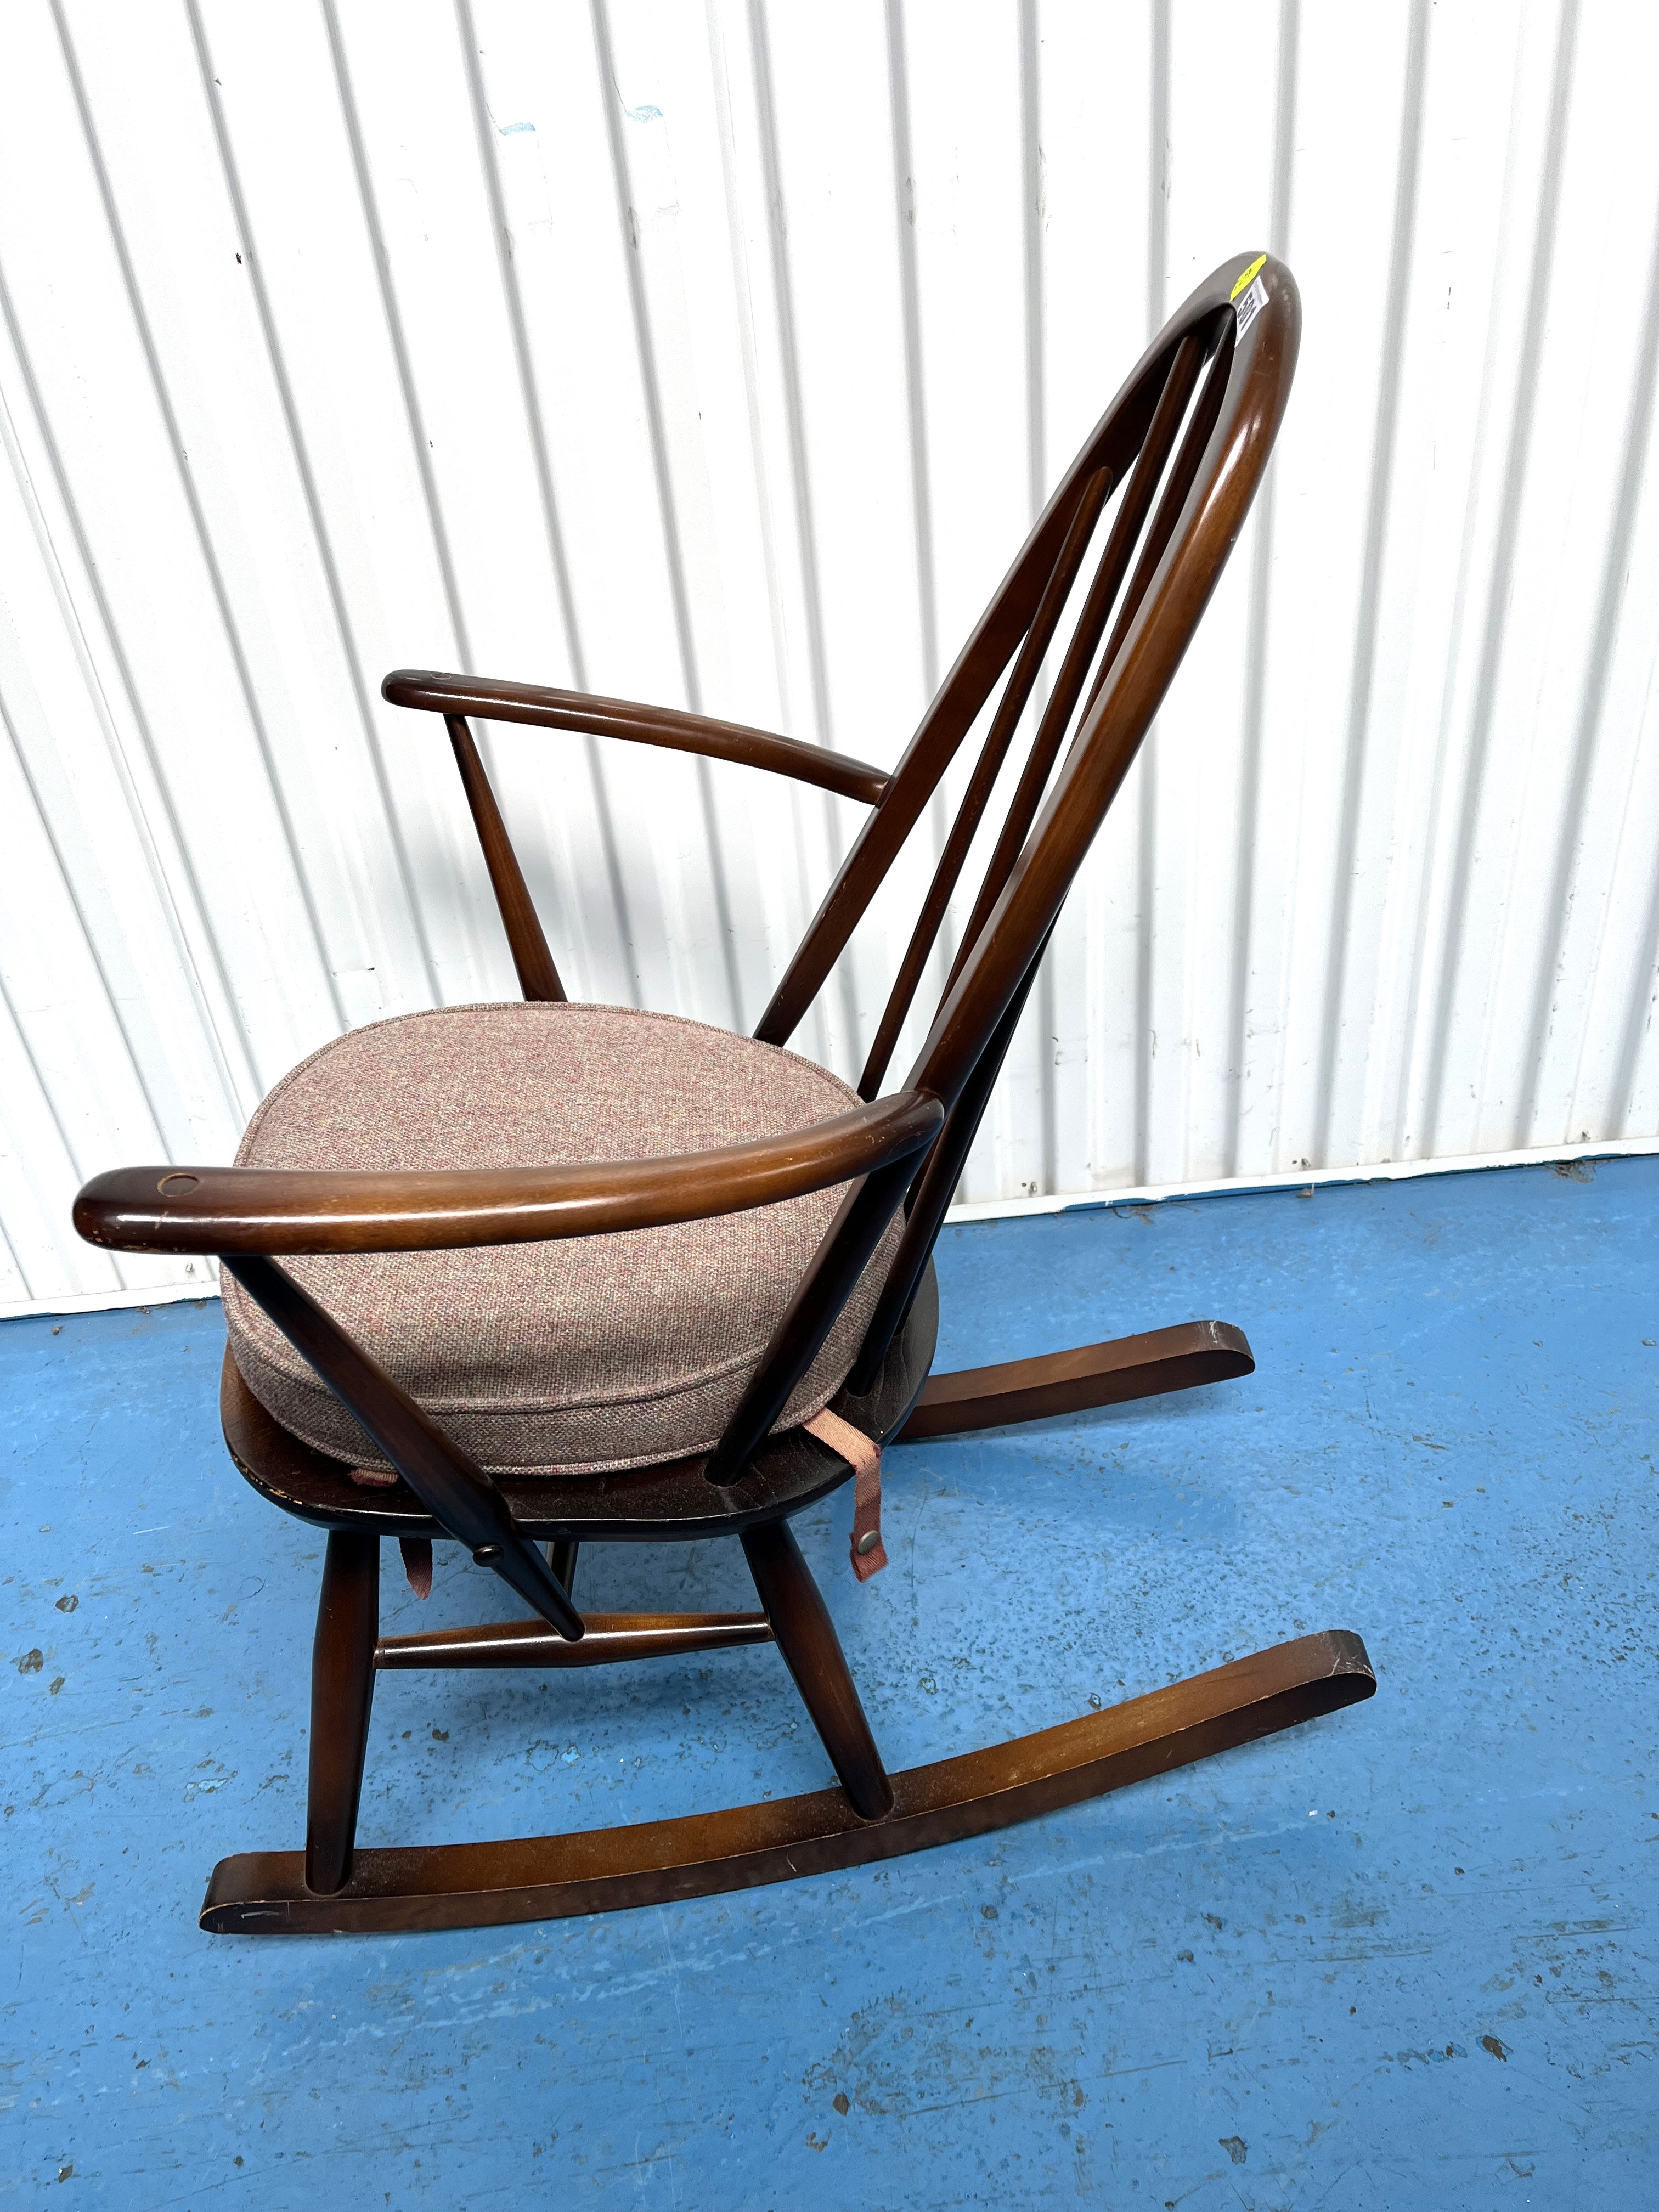 Ercol style rocking chair - Image 4 of 6